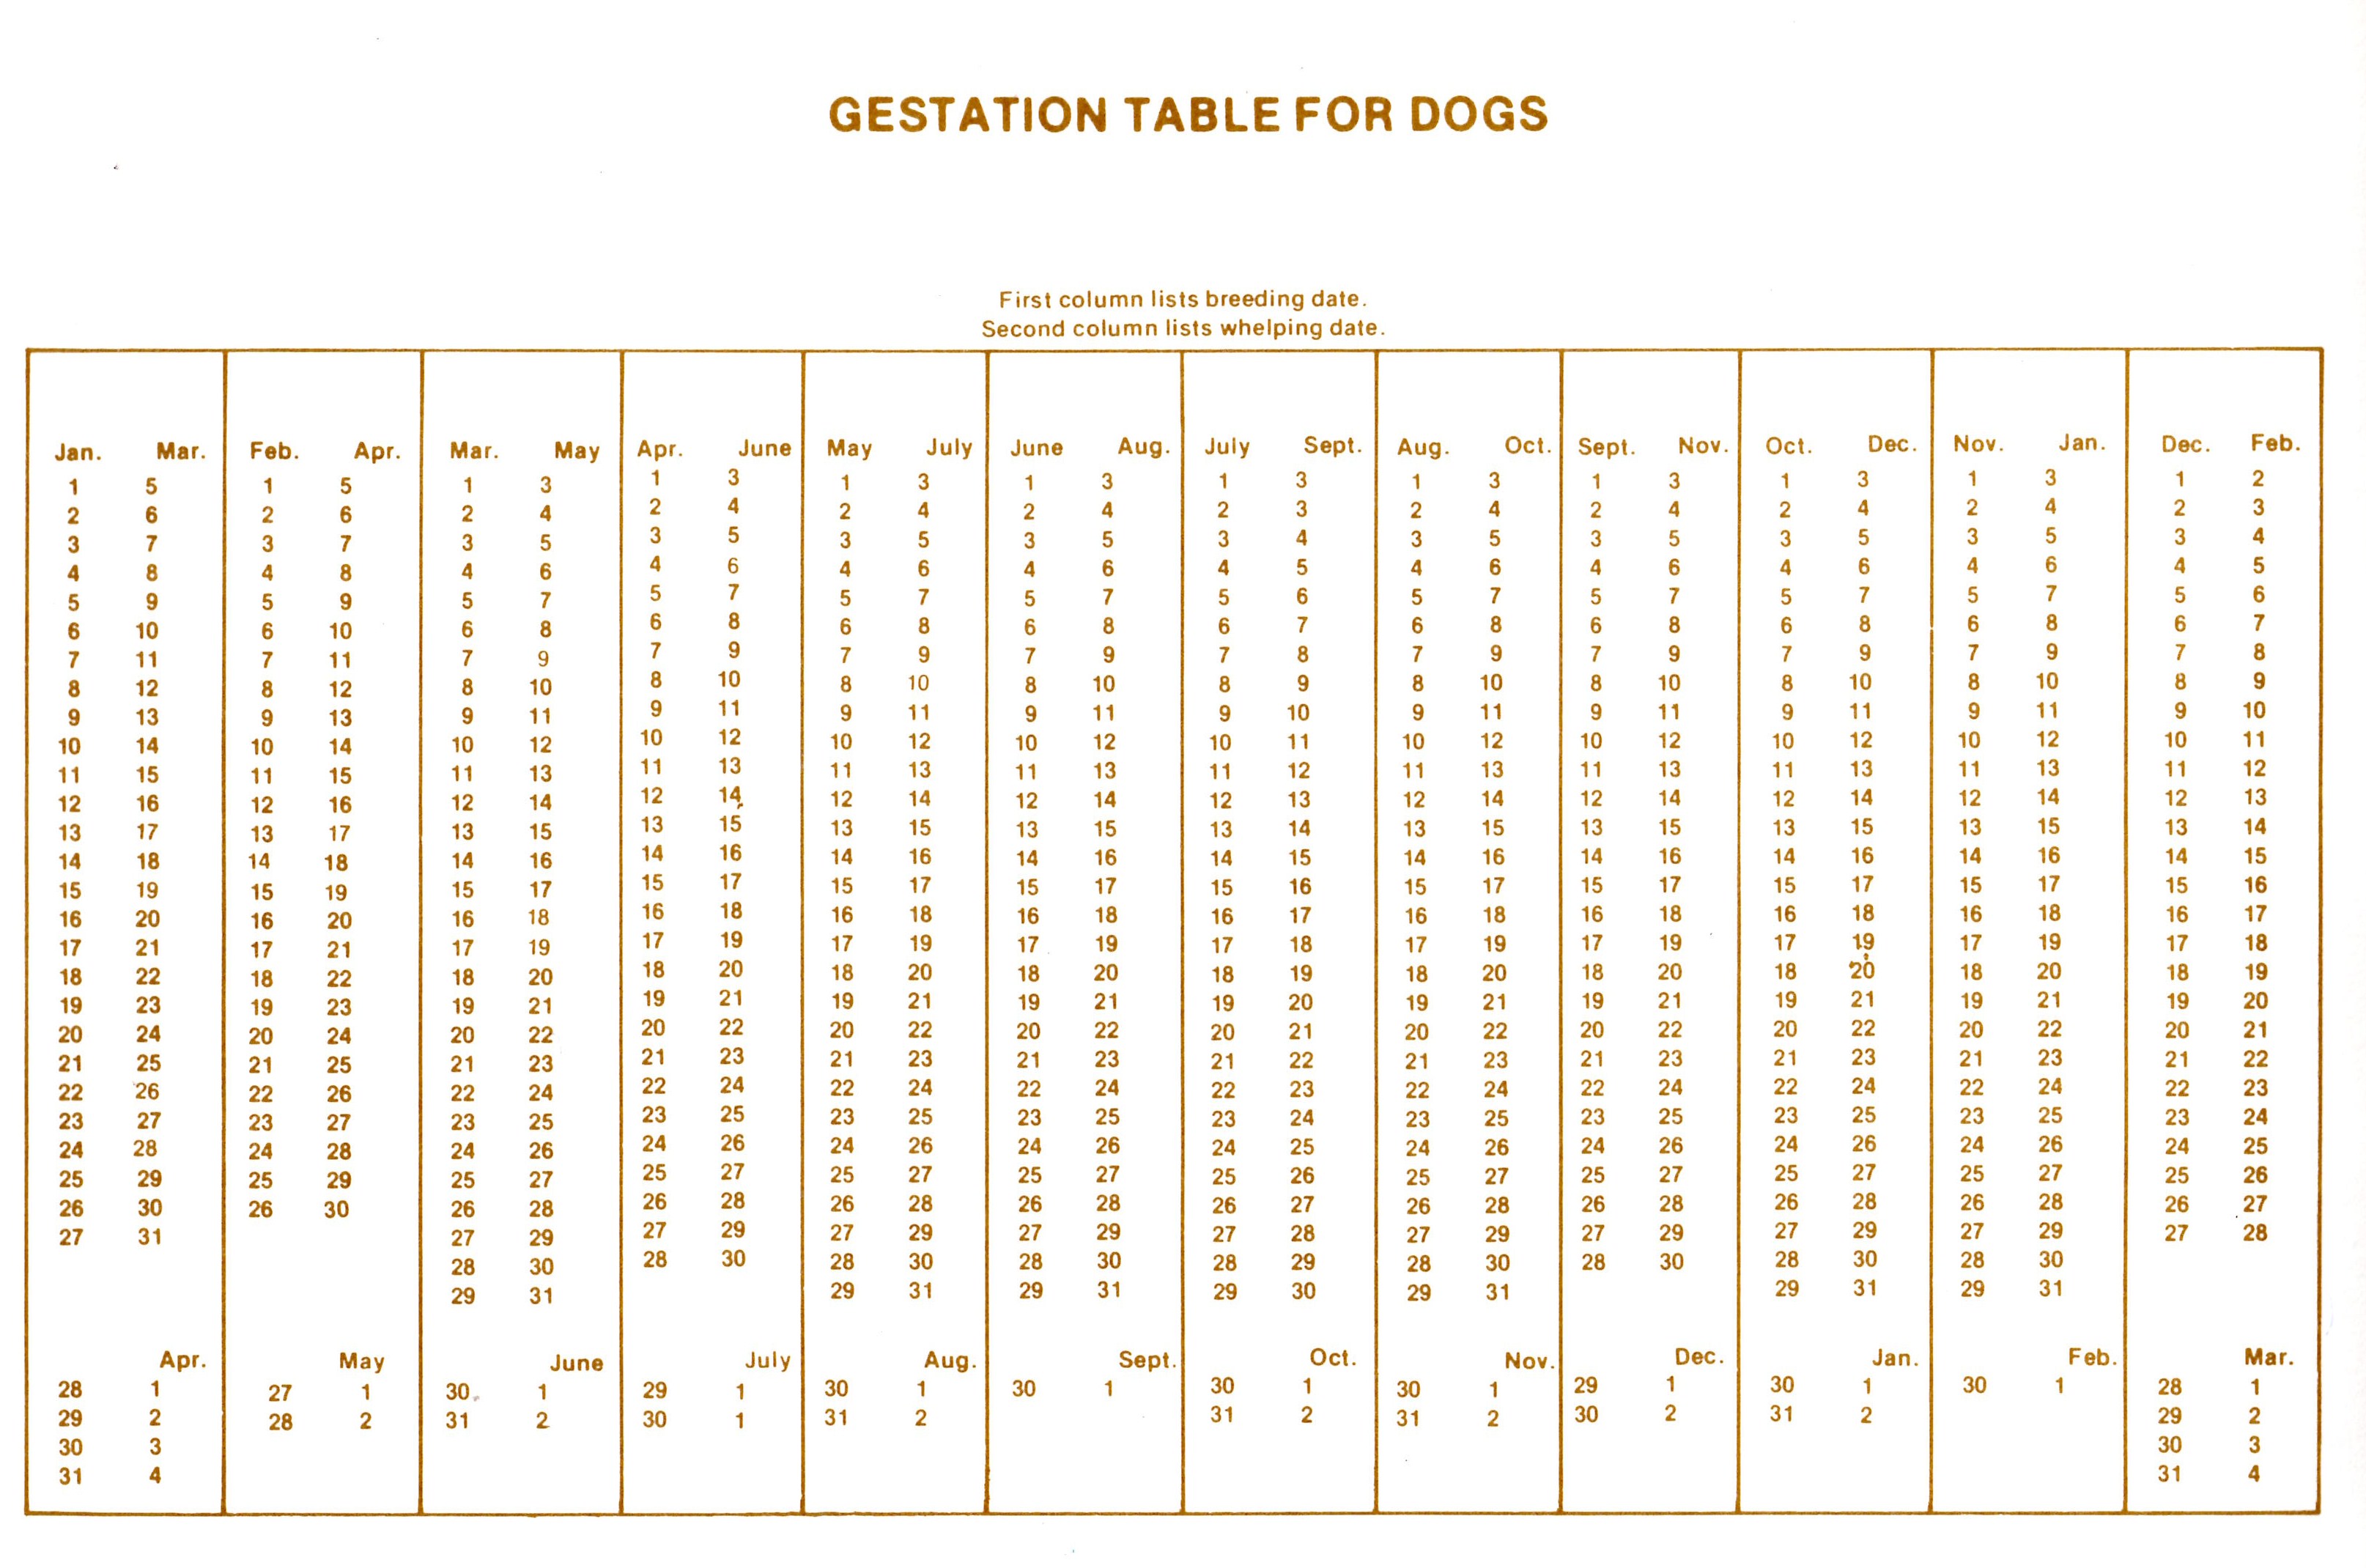 Gestation Table for Dogs